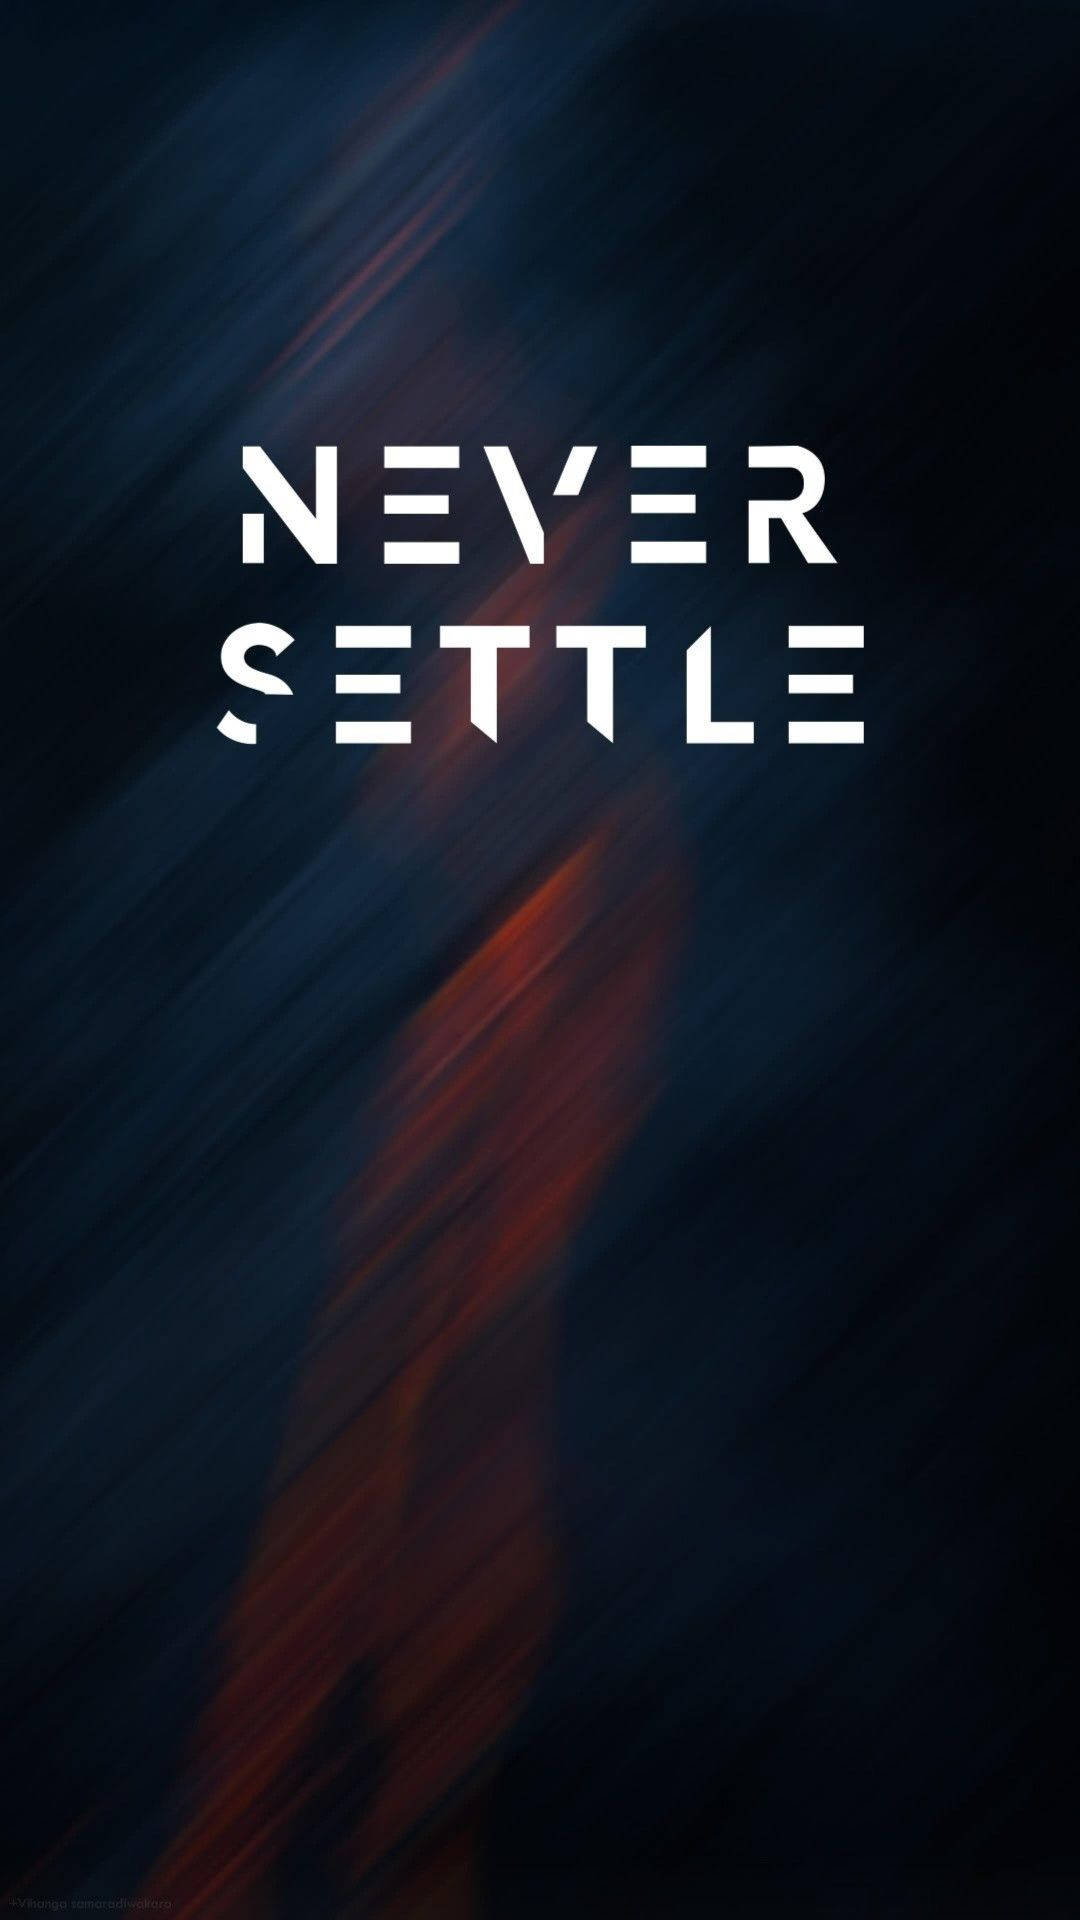 Never Settle Motivational Quotes Iphone Background